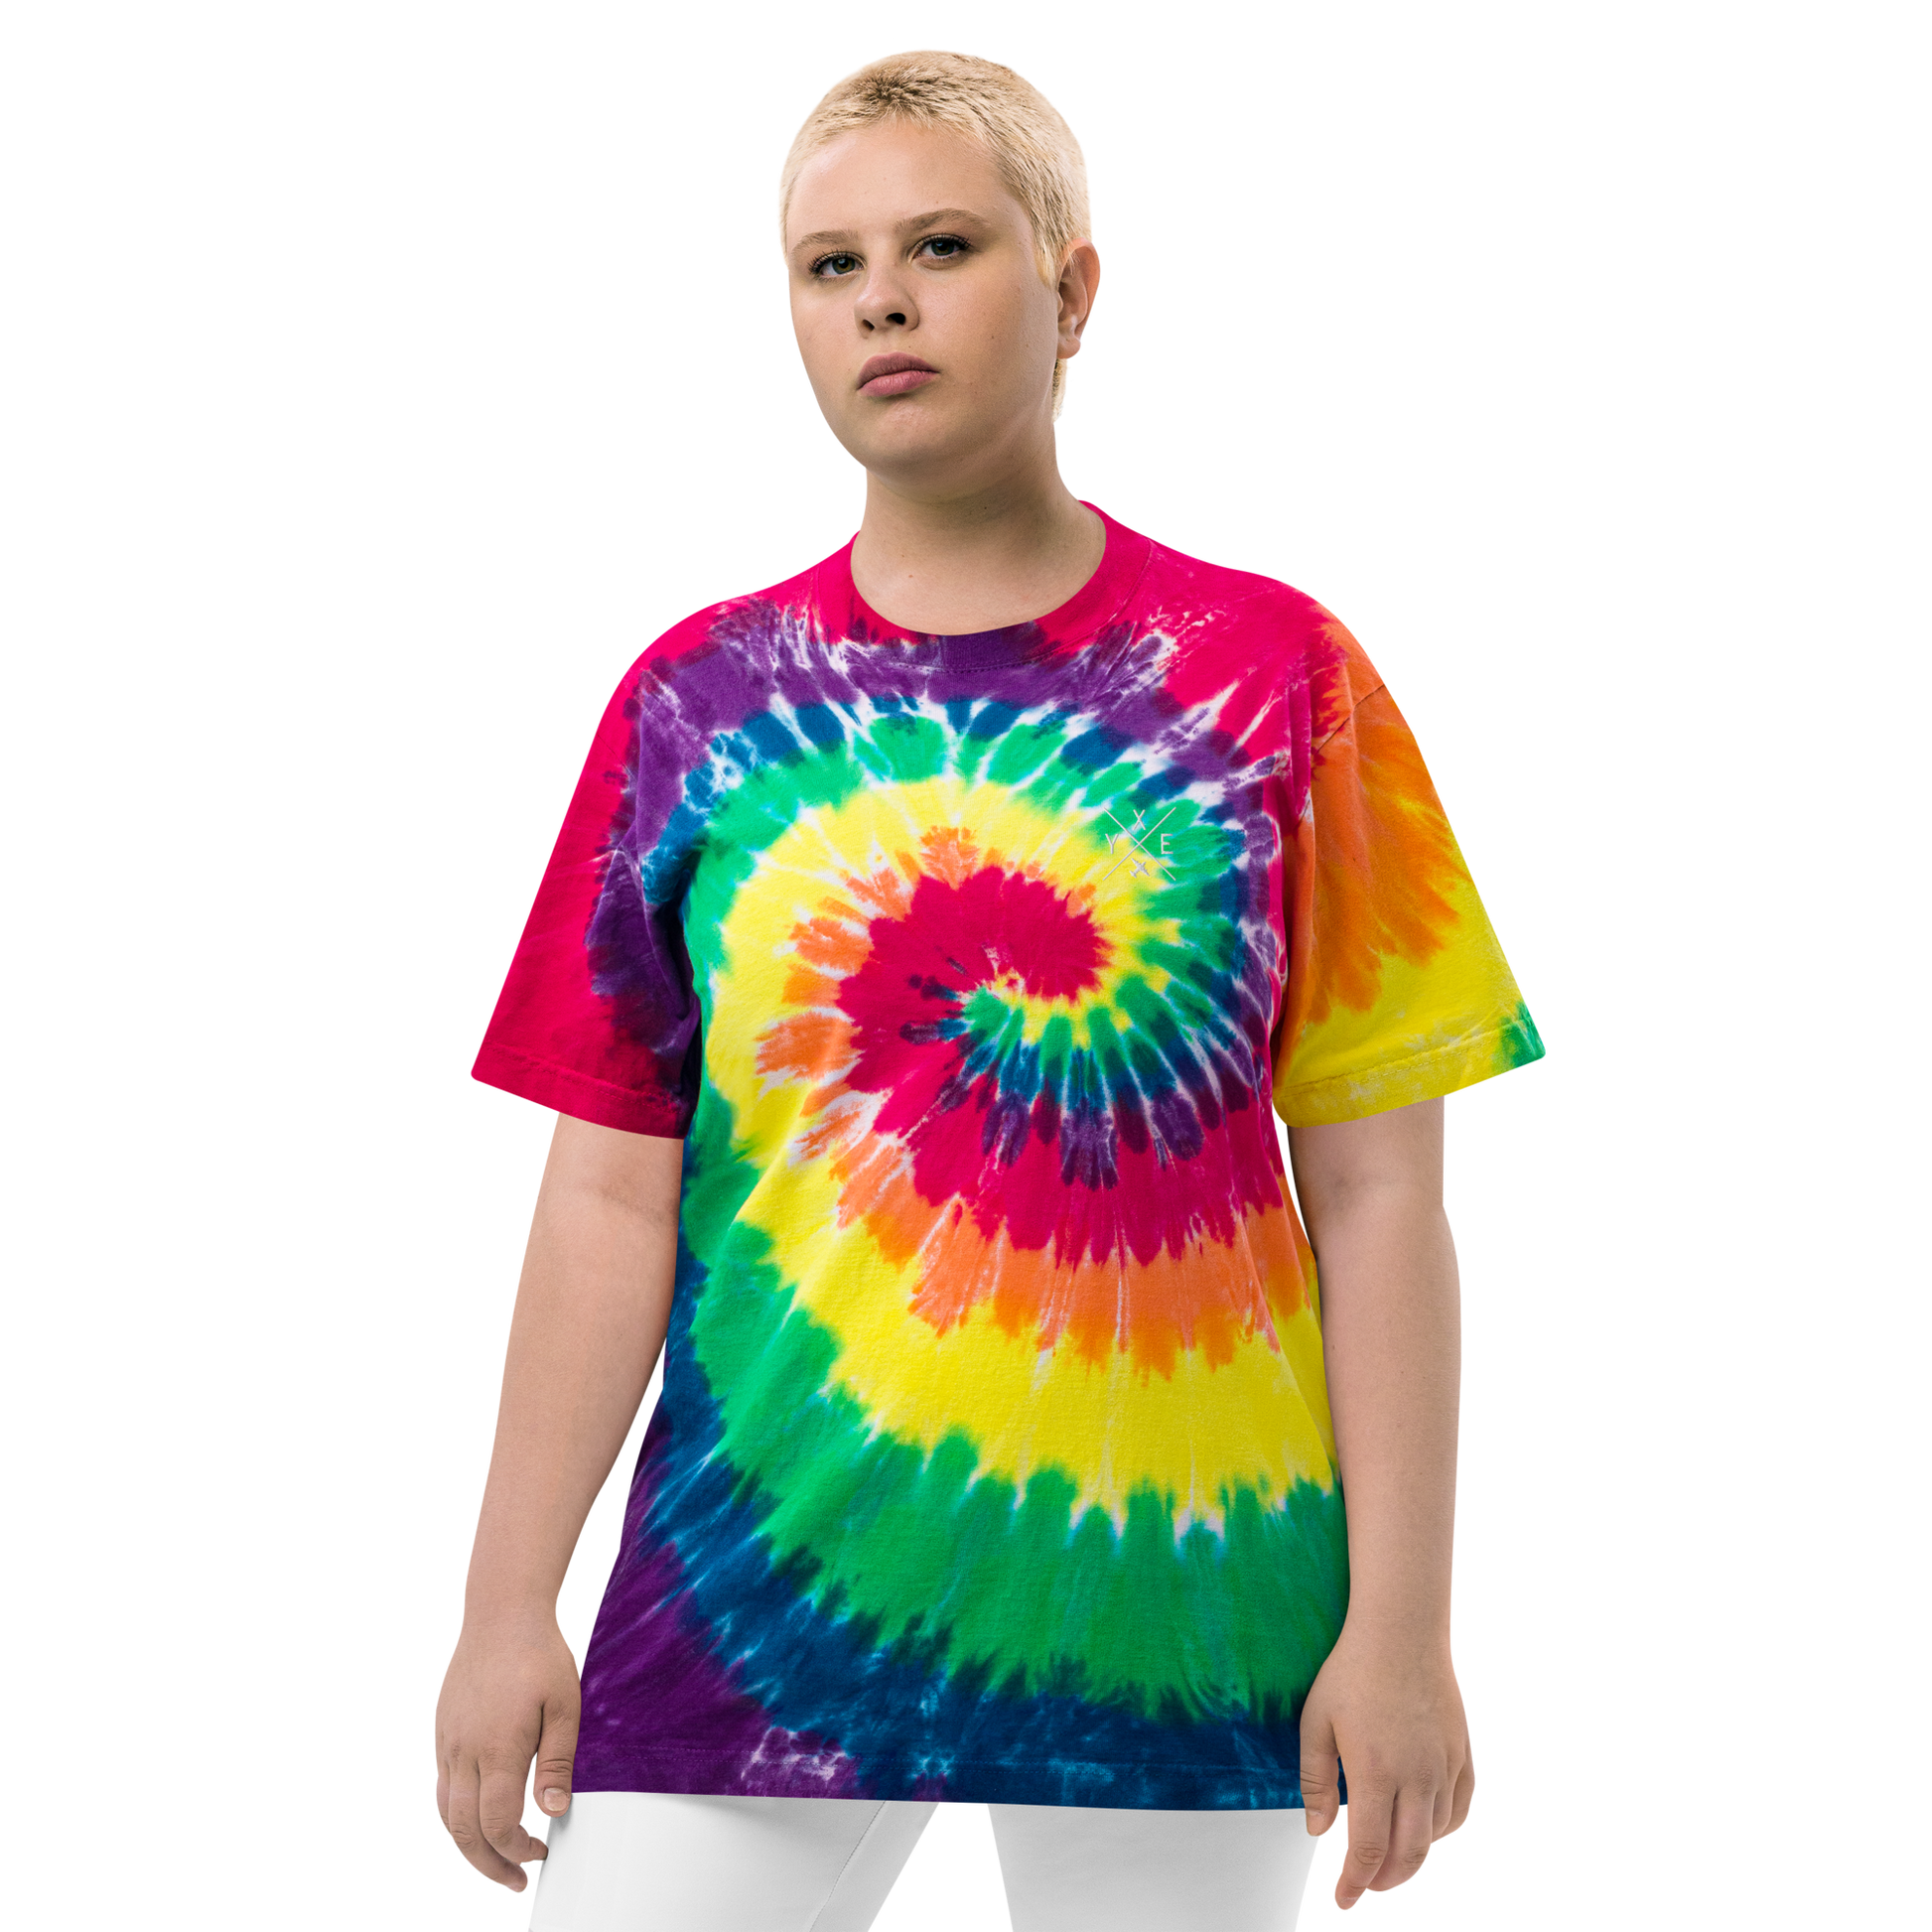 YHM Designs - YXE Saskatoon Oversized Tie-Dye T-Shirt - Crossed-X Design with Airport Code and Vintage Propliner - White Embroidery - Image 01